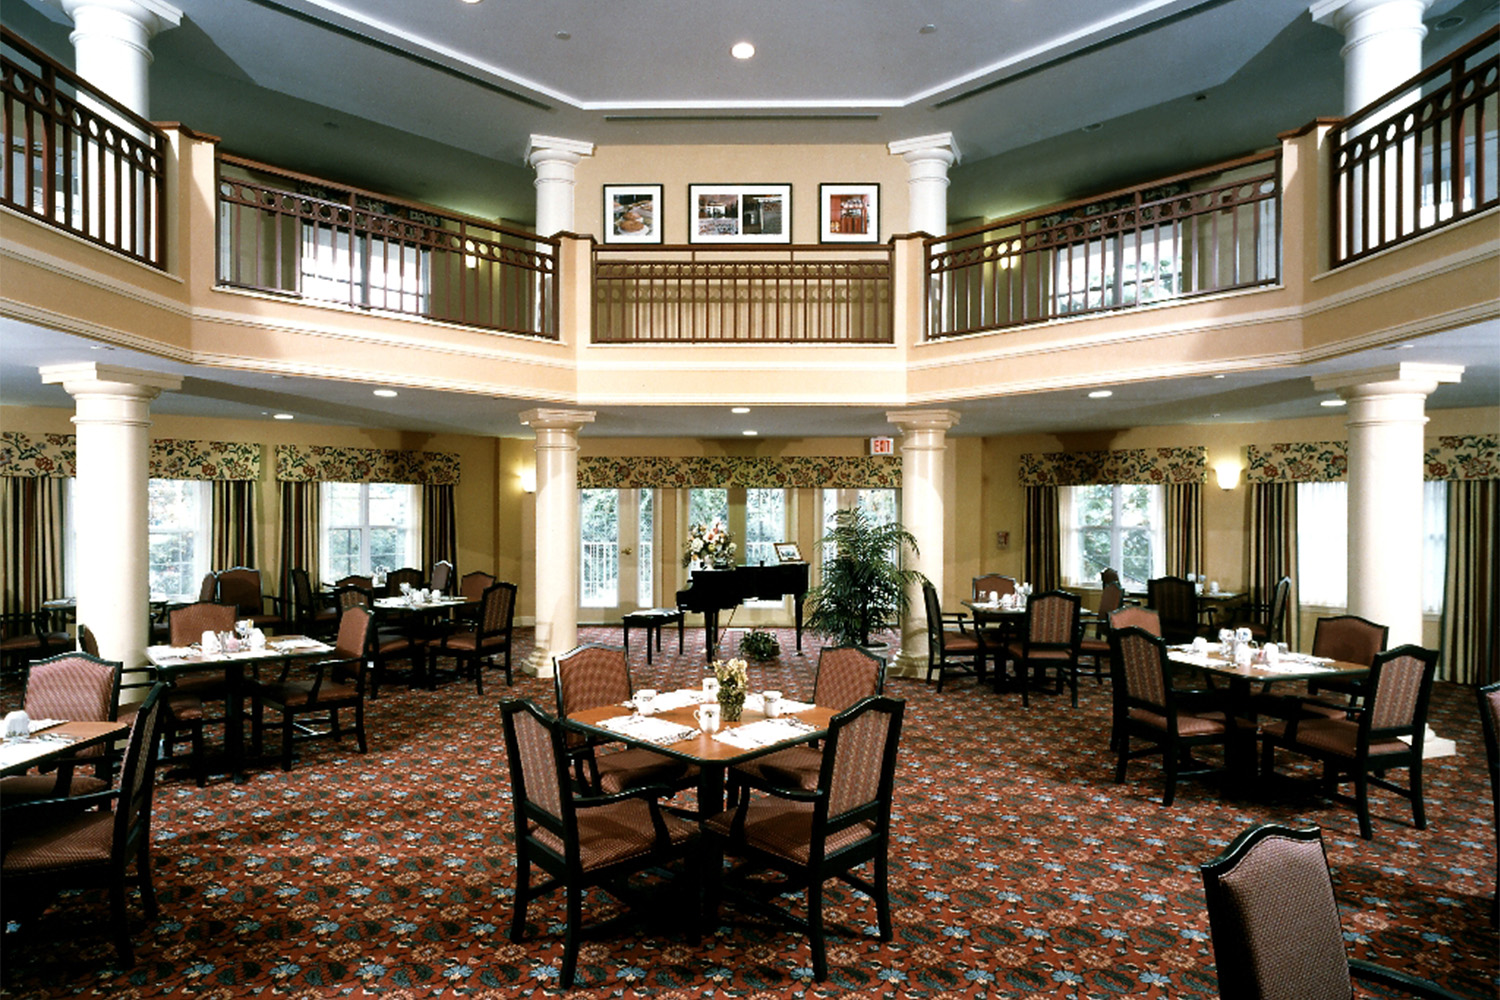 Octagonal dining room, with wooden chairs and tables, and windows on every wall 